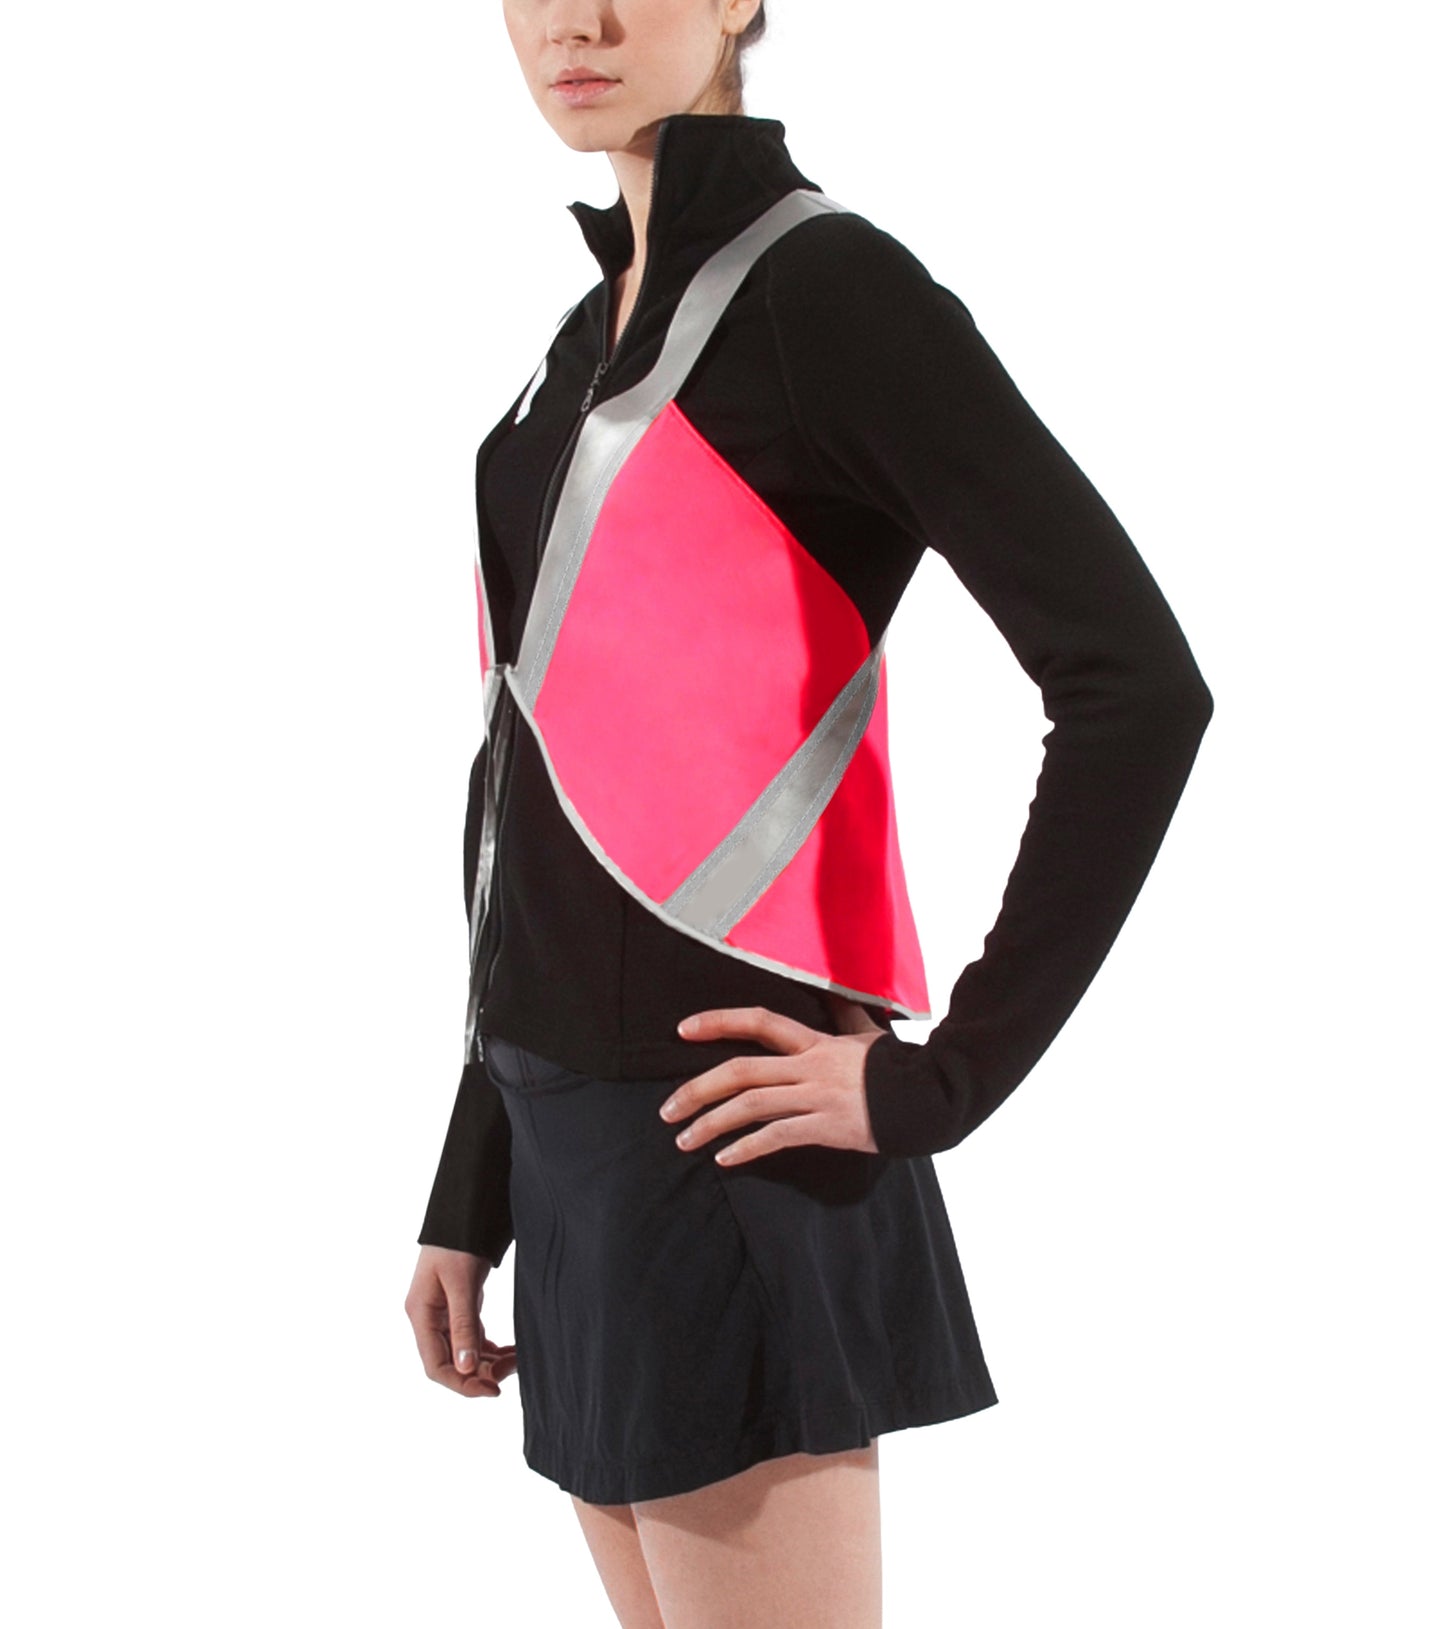 model wears cute vespert eco cotton candy neon pink stylish reflective hi vis safety vest for women reflecting clothing high visibility gear accessory womens fashion bike bike cycling walk run running dog walking walker night sustainable nighttime bright 3M scotchlite made in NYC USA